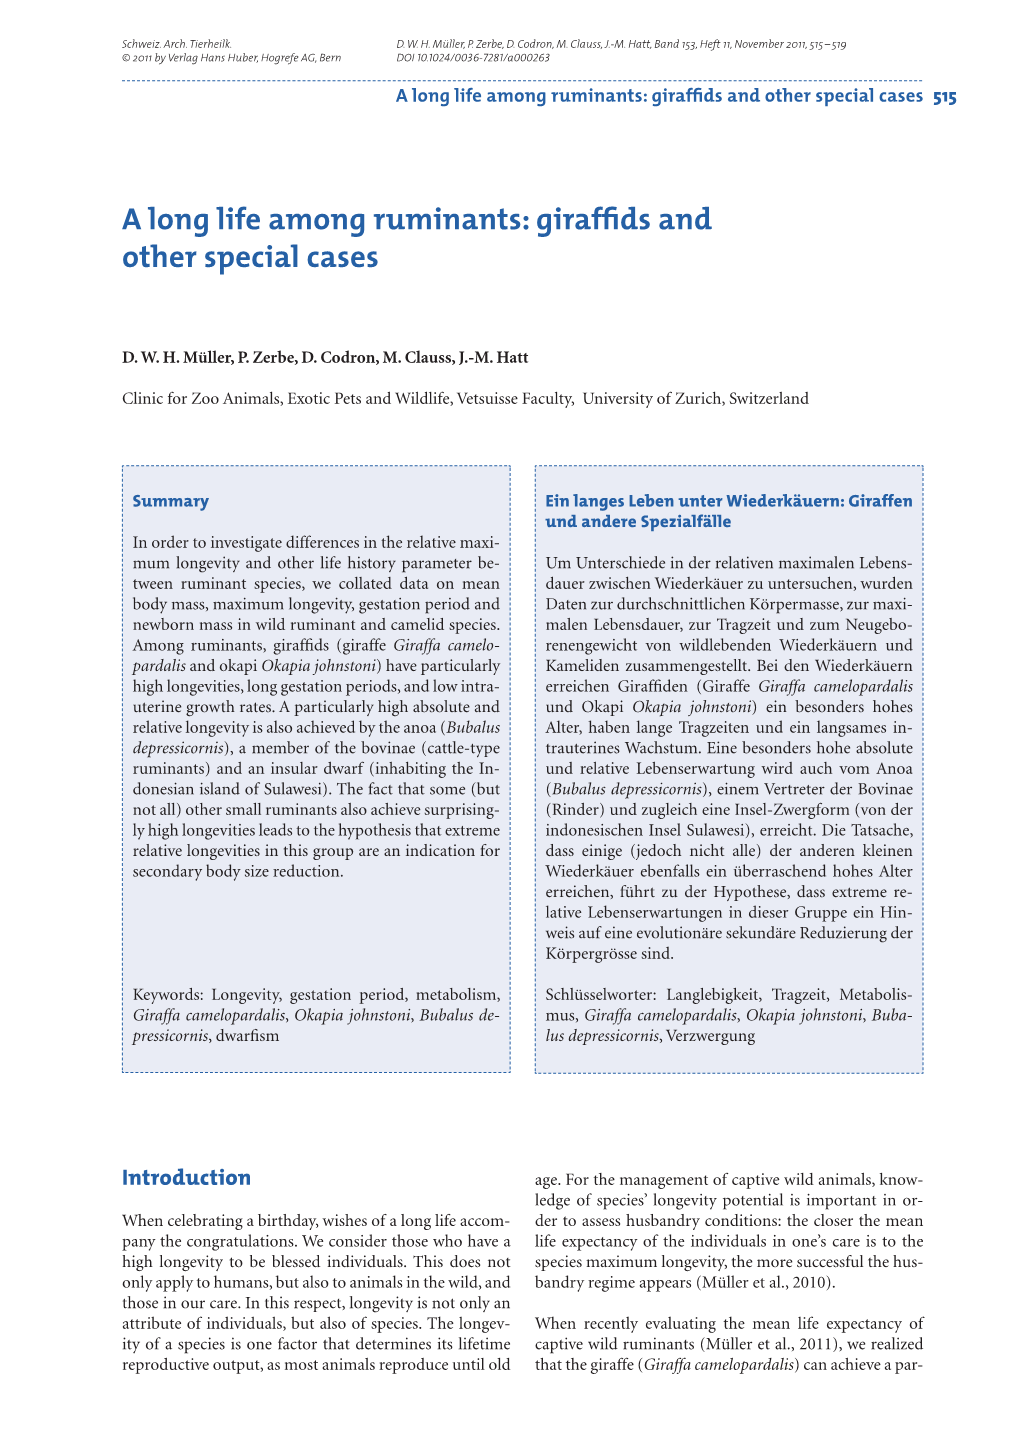 A Long Life Among Ruminants: Giraffids and Other Special Cases